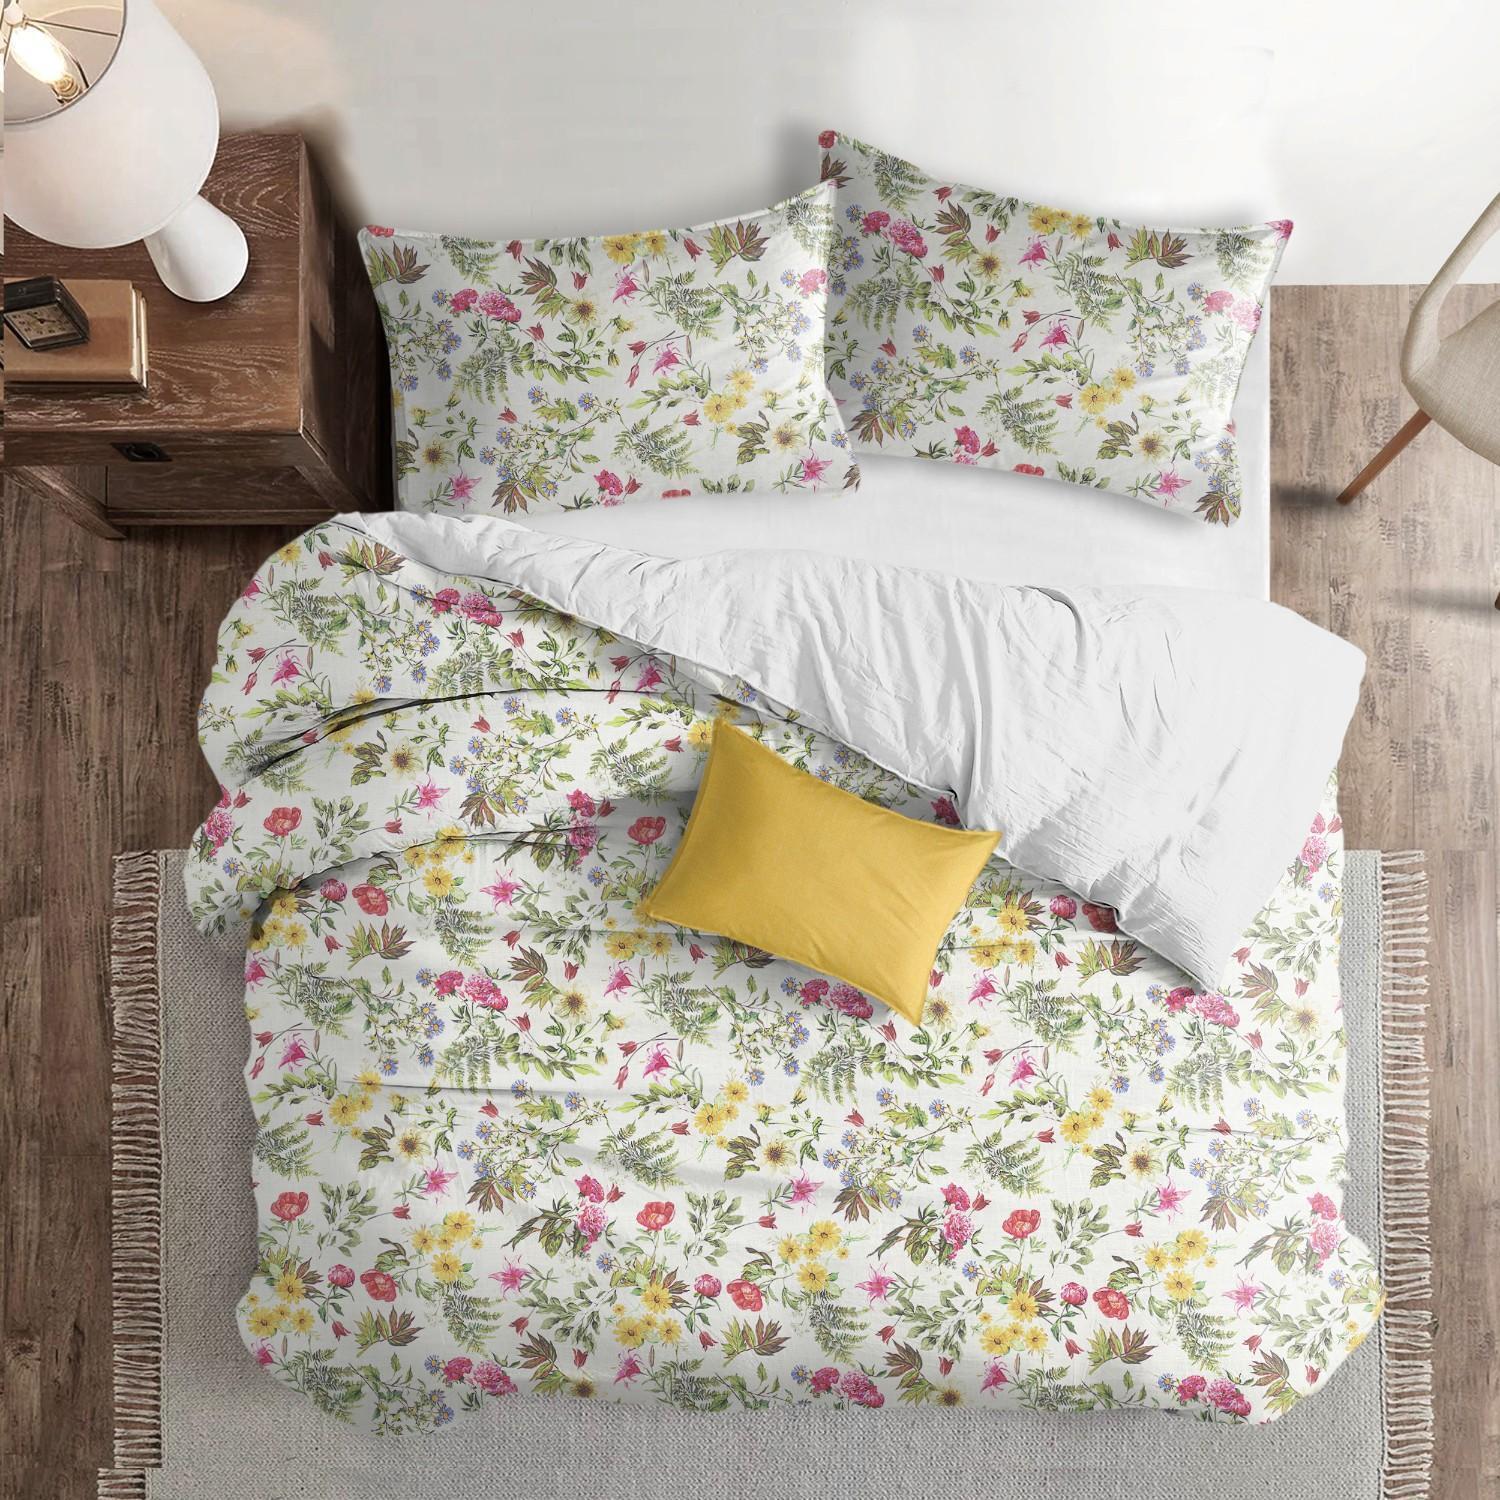 Set of 3 White and Pink Floral Comforter with Pillow Shams - King Size alternate image